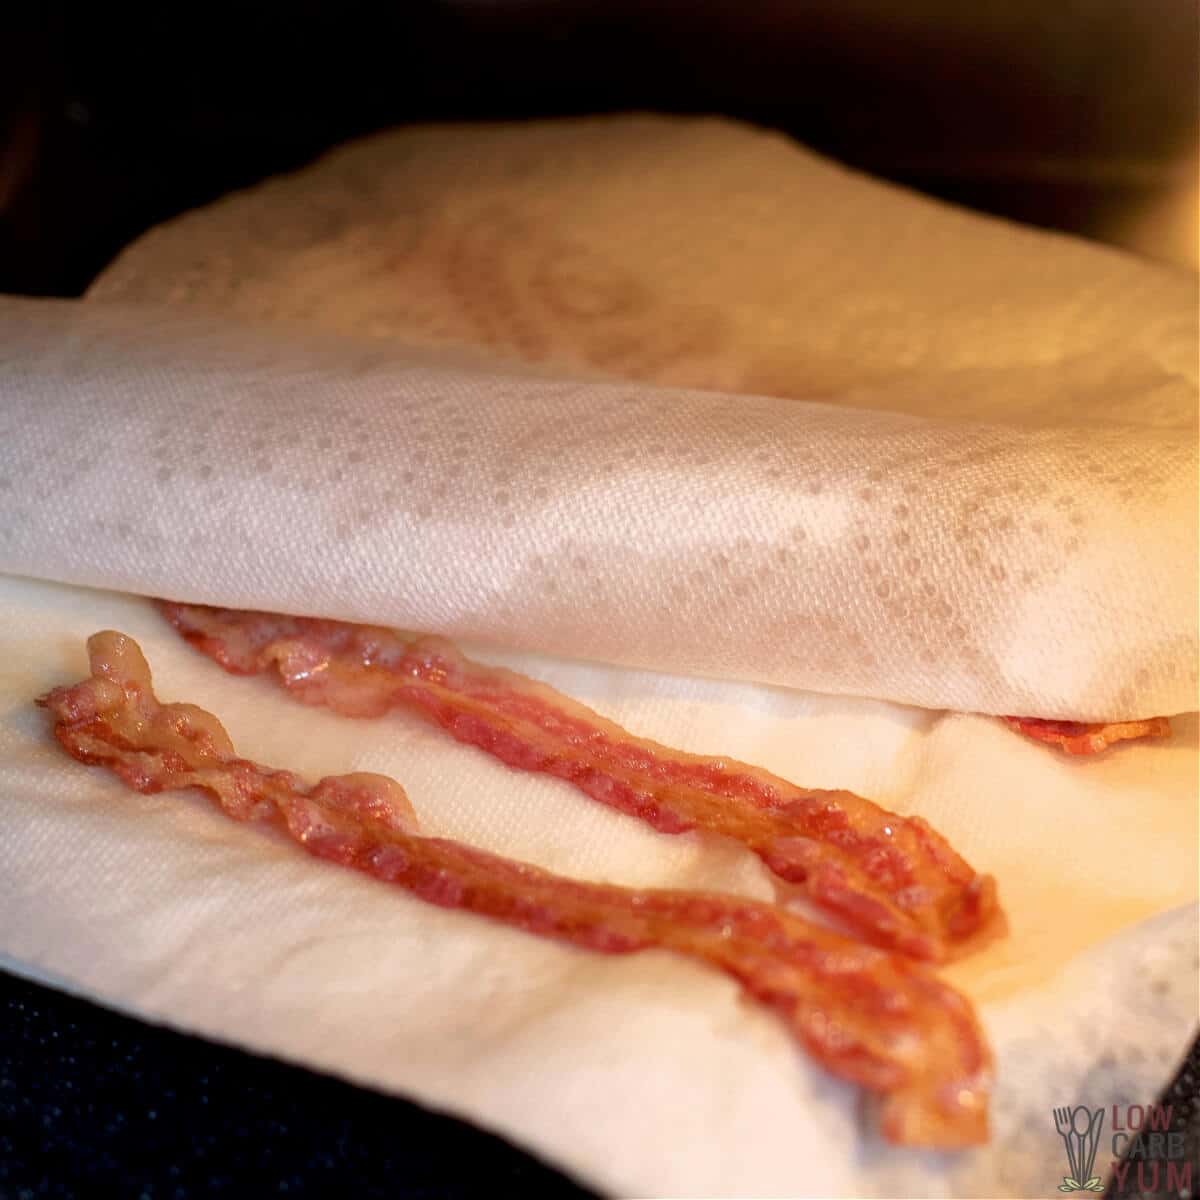 cooked bacon between paper towel layers in microwave